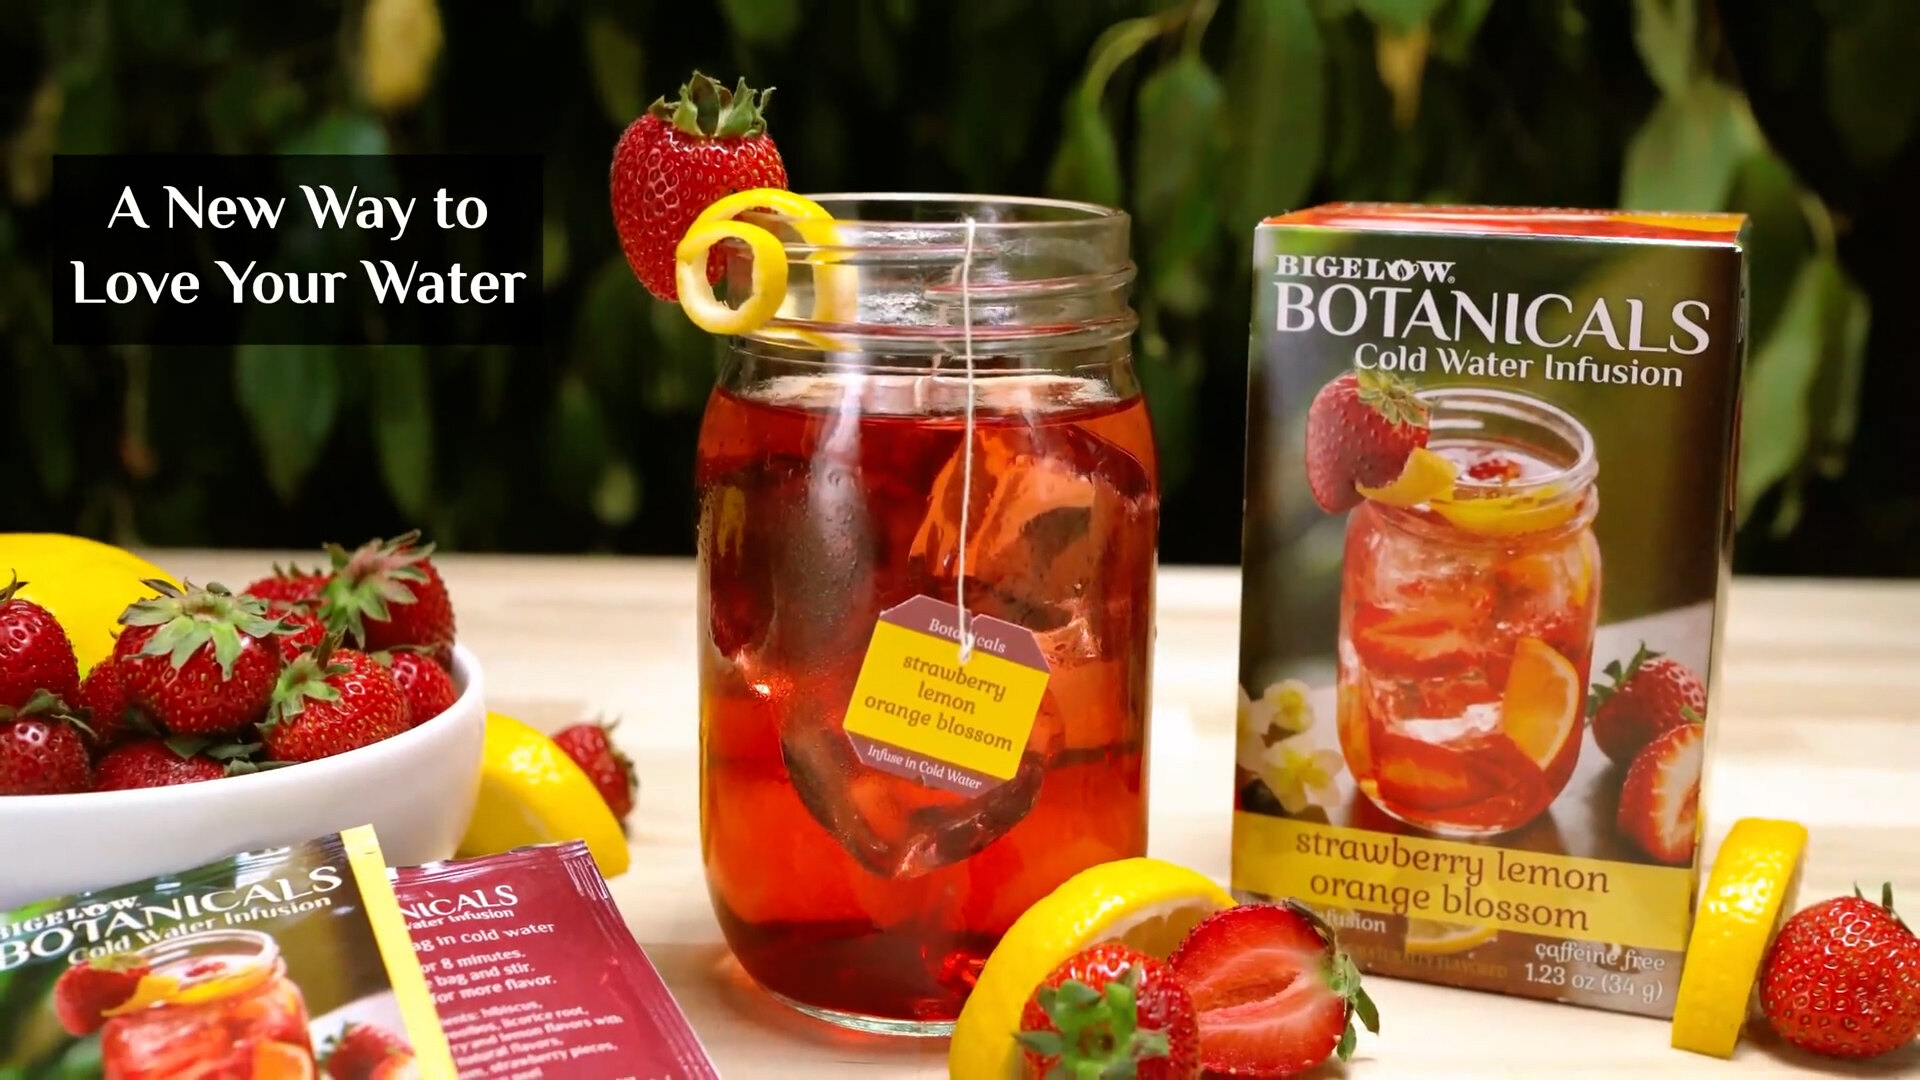 Bigelow Tea launches 2 Botanical Cold Water Infusions